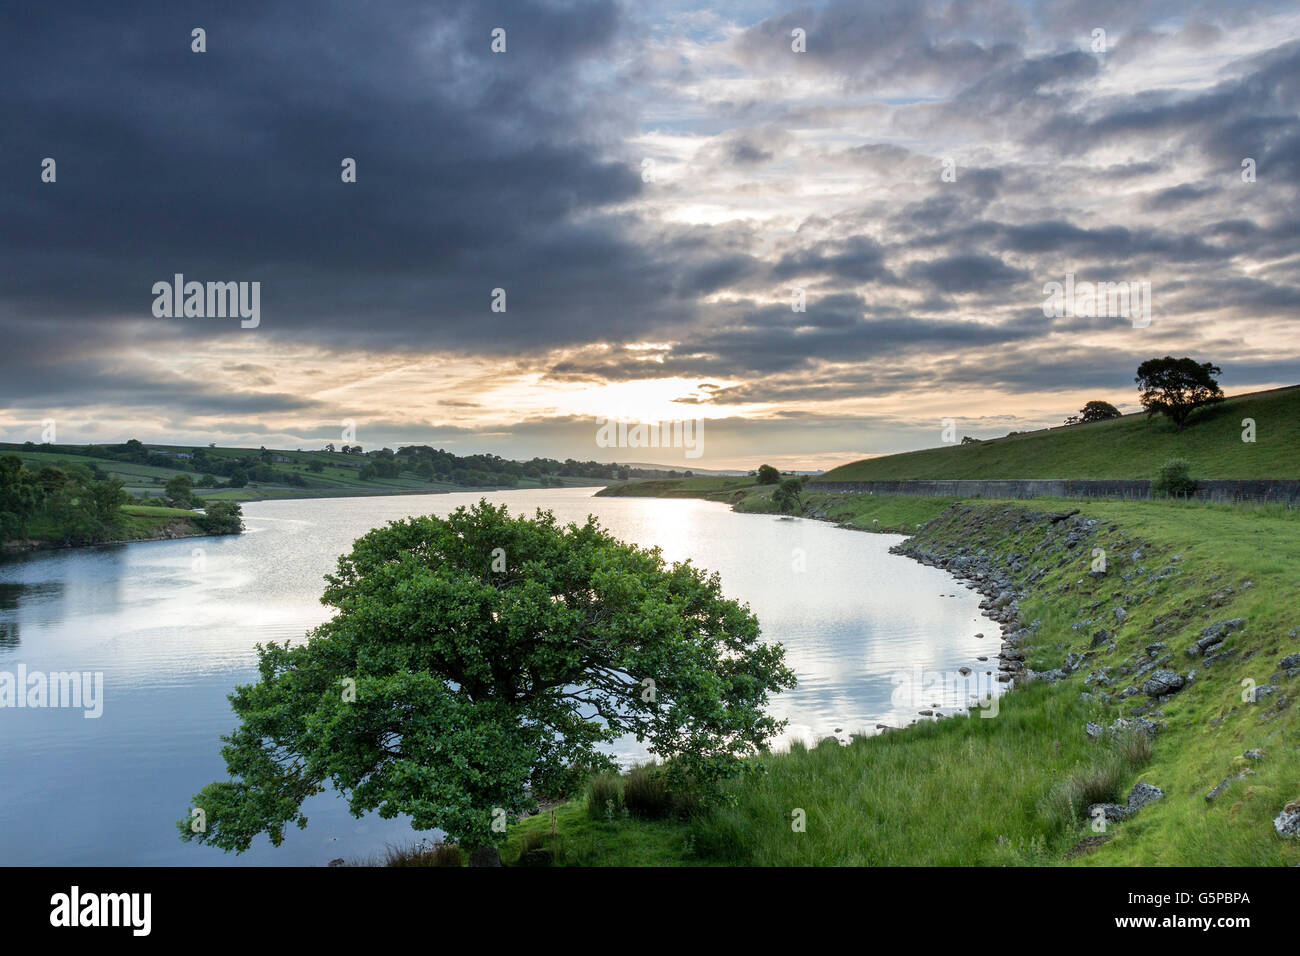 Hury Reservoir, Baldersdale, County Durham, UK. Wednesday 22nd June 2016. UK Weather. It was a cloudy start to the day in northern England, but there was a hint of the brightness to come as the day progresses. Stock Photo